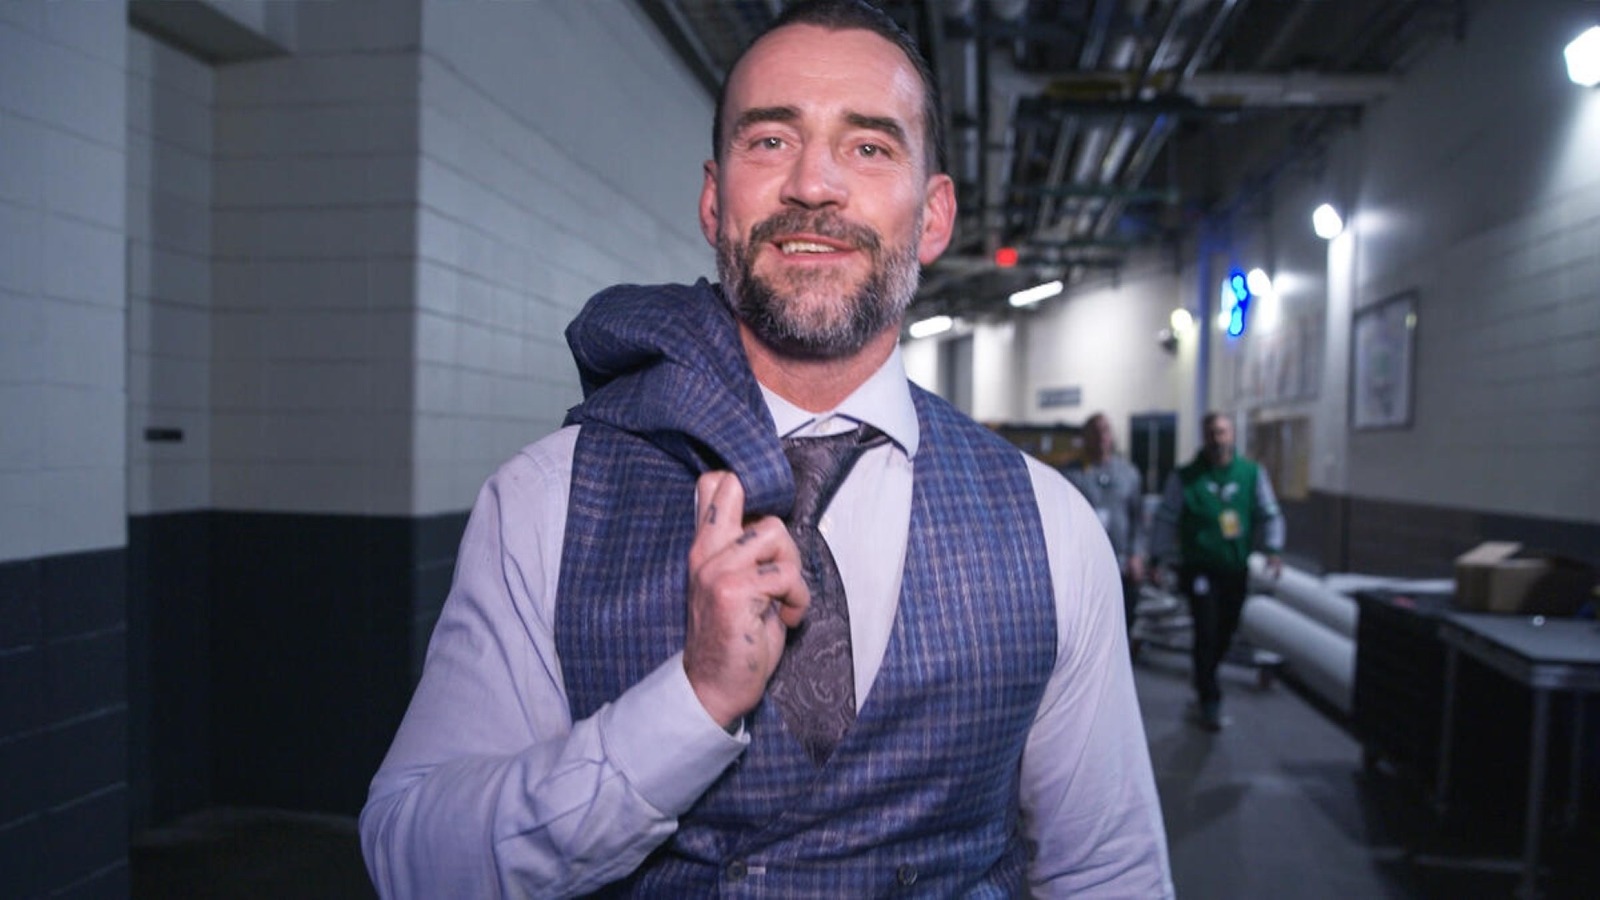 Video: CM Punk Appears After WWE SmackDown, Provides Injury Update